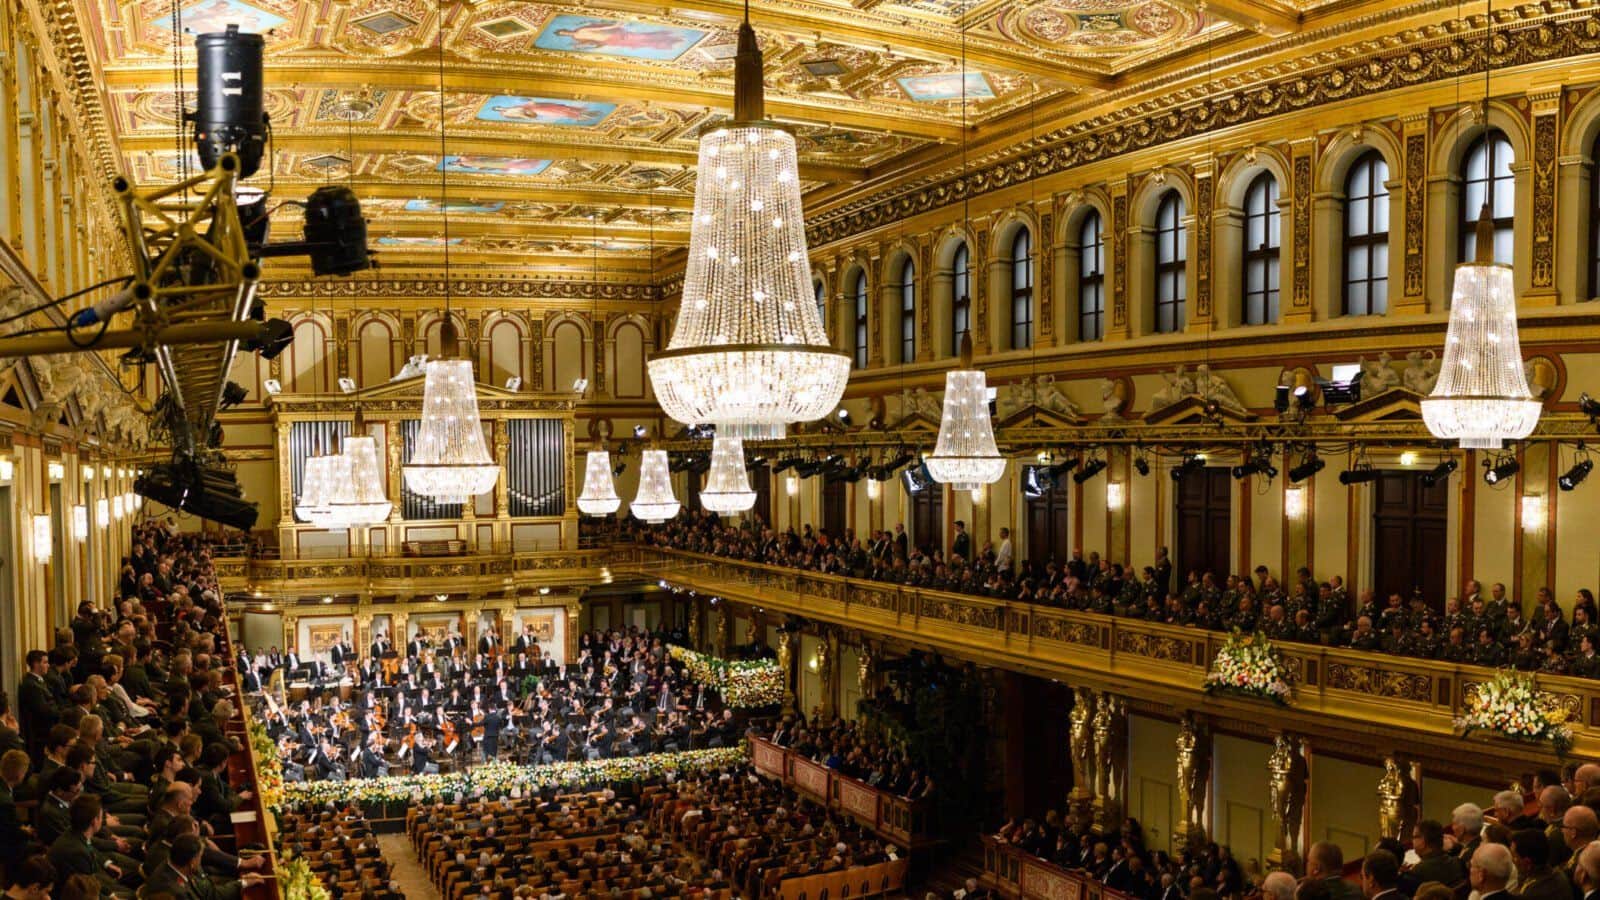 Vienna's music seasons: A guide to peak times, festivals, concerts